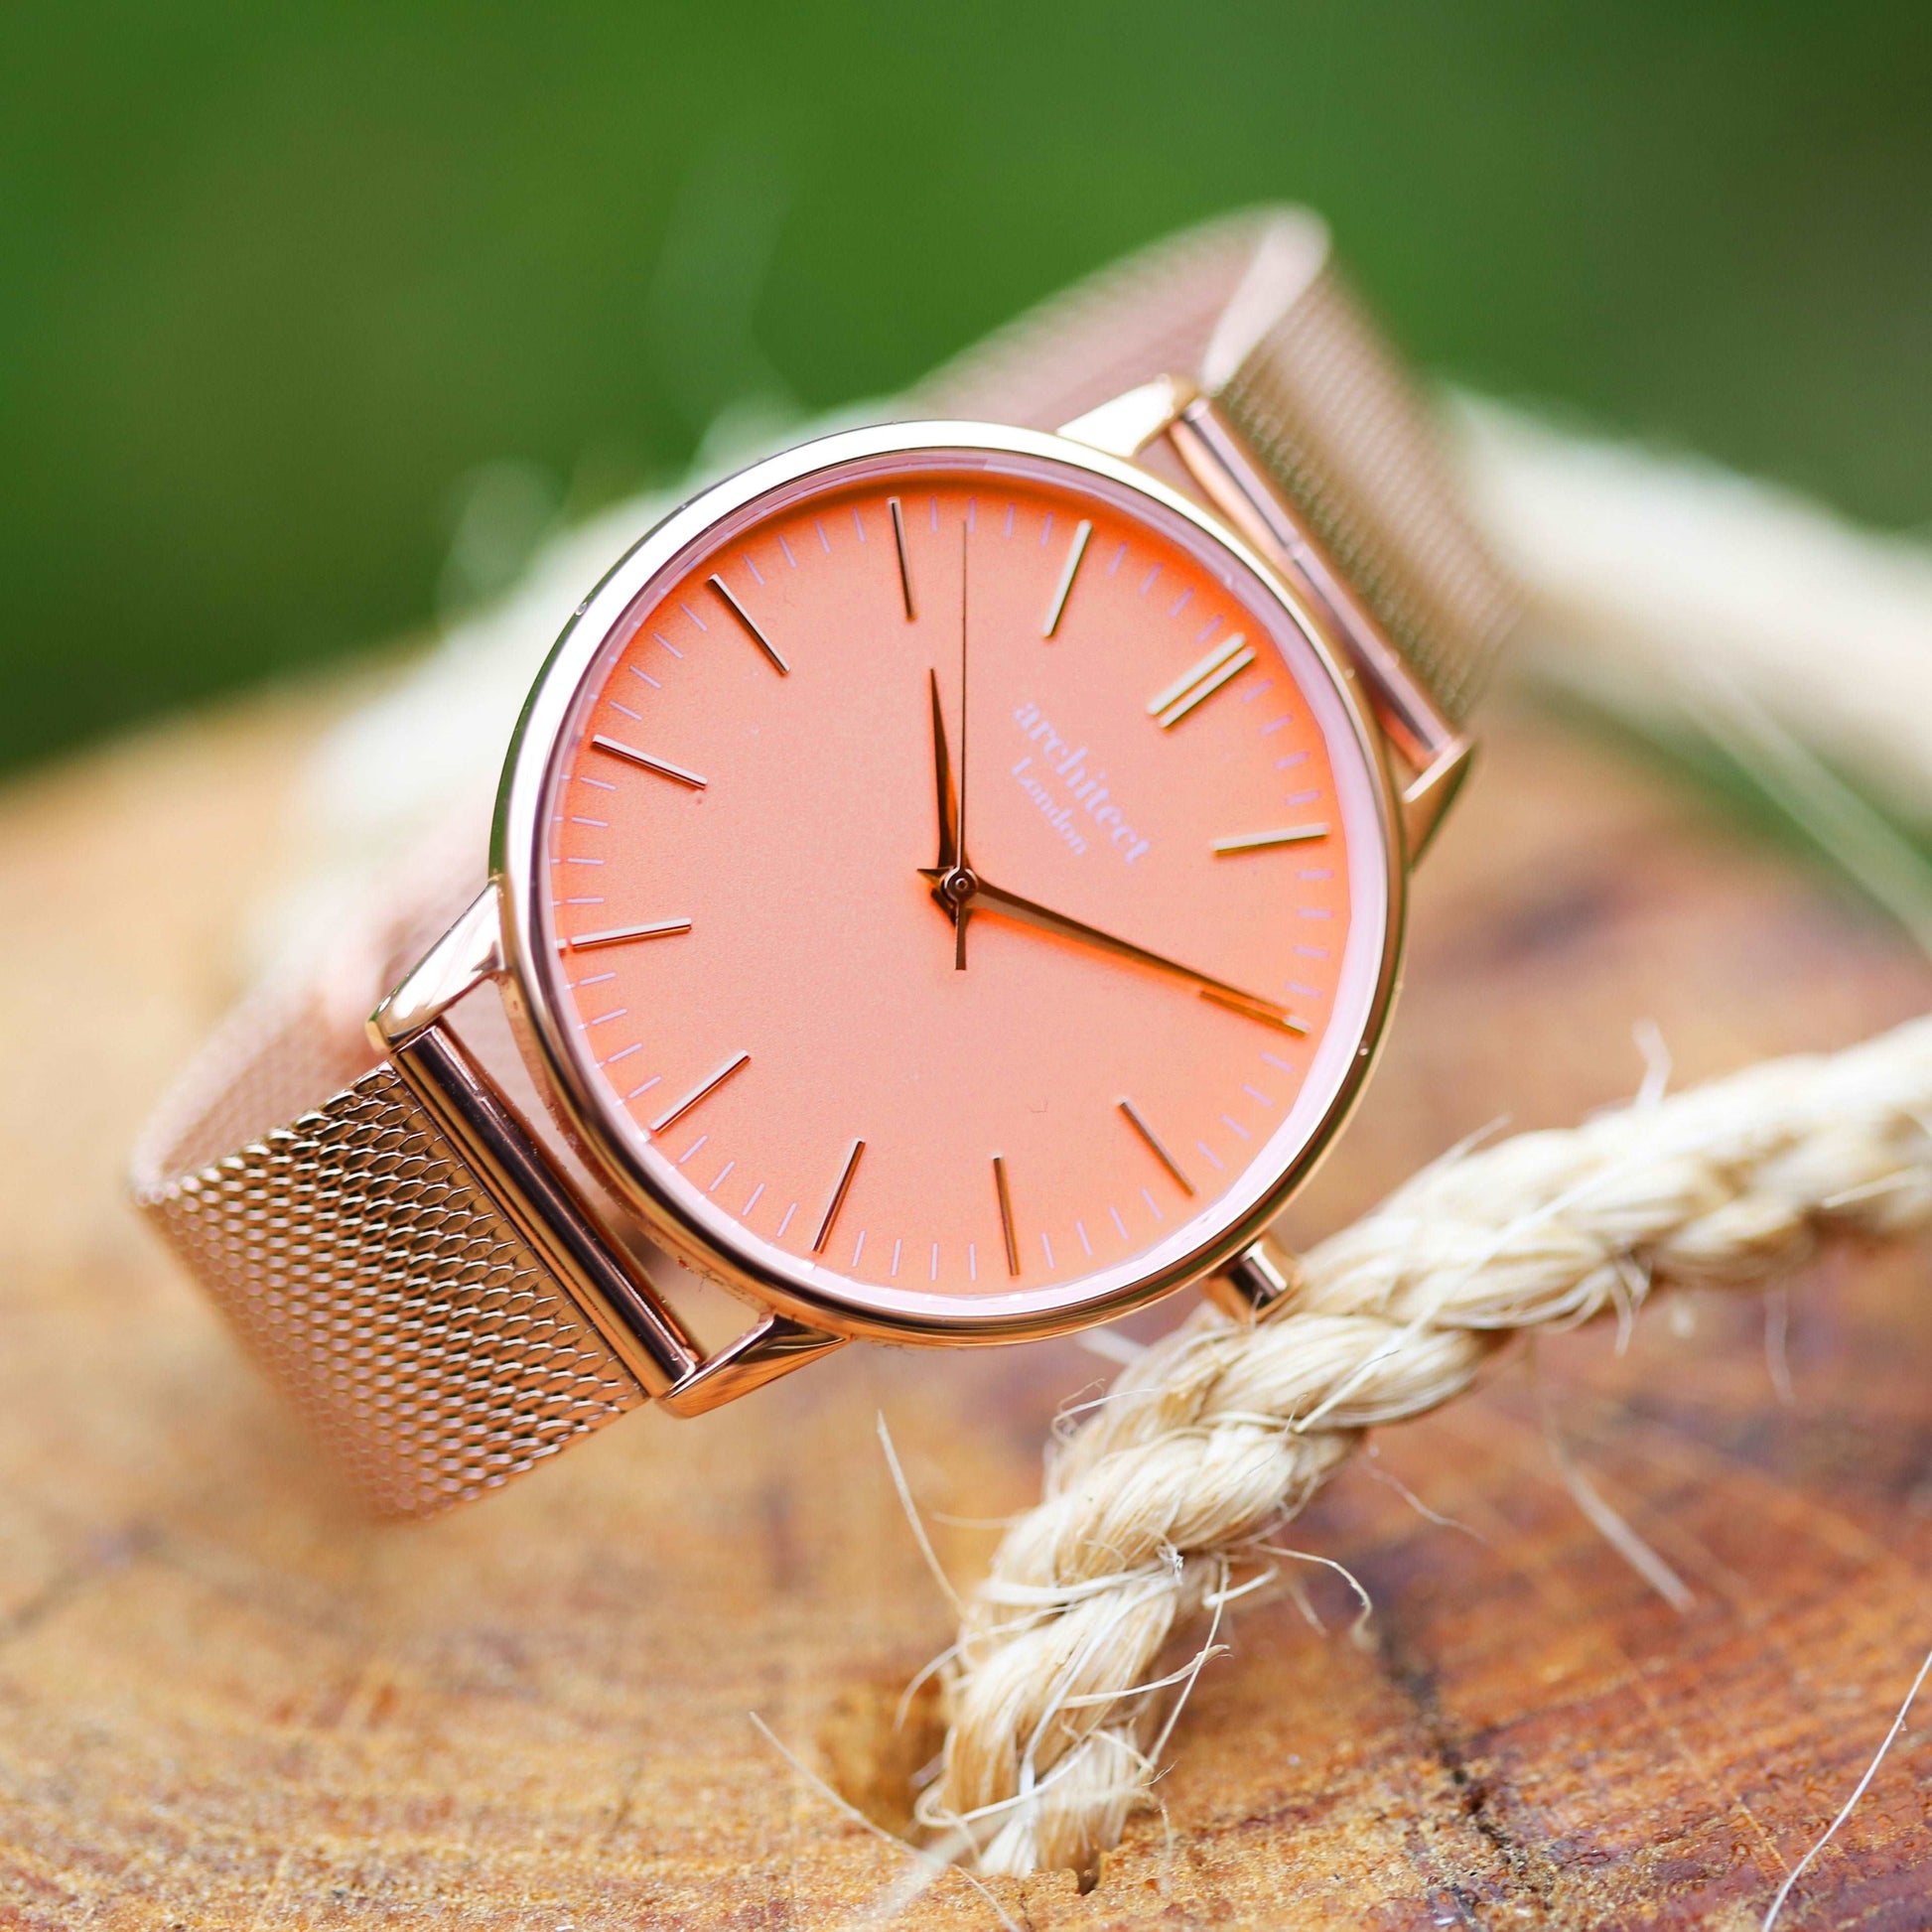 Personalized Ladies' Watches - Architēct Coral Engraved Watch In Rose Gold 